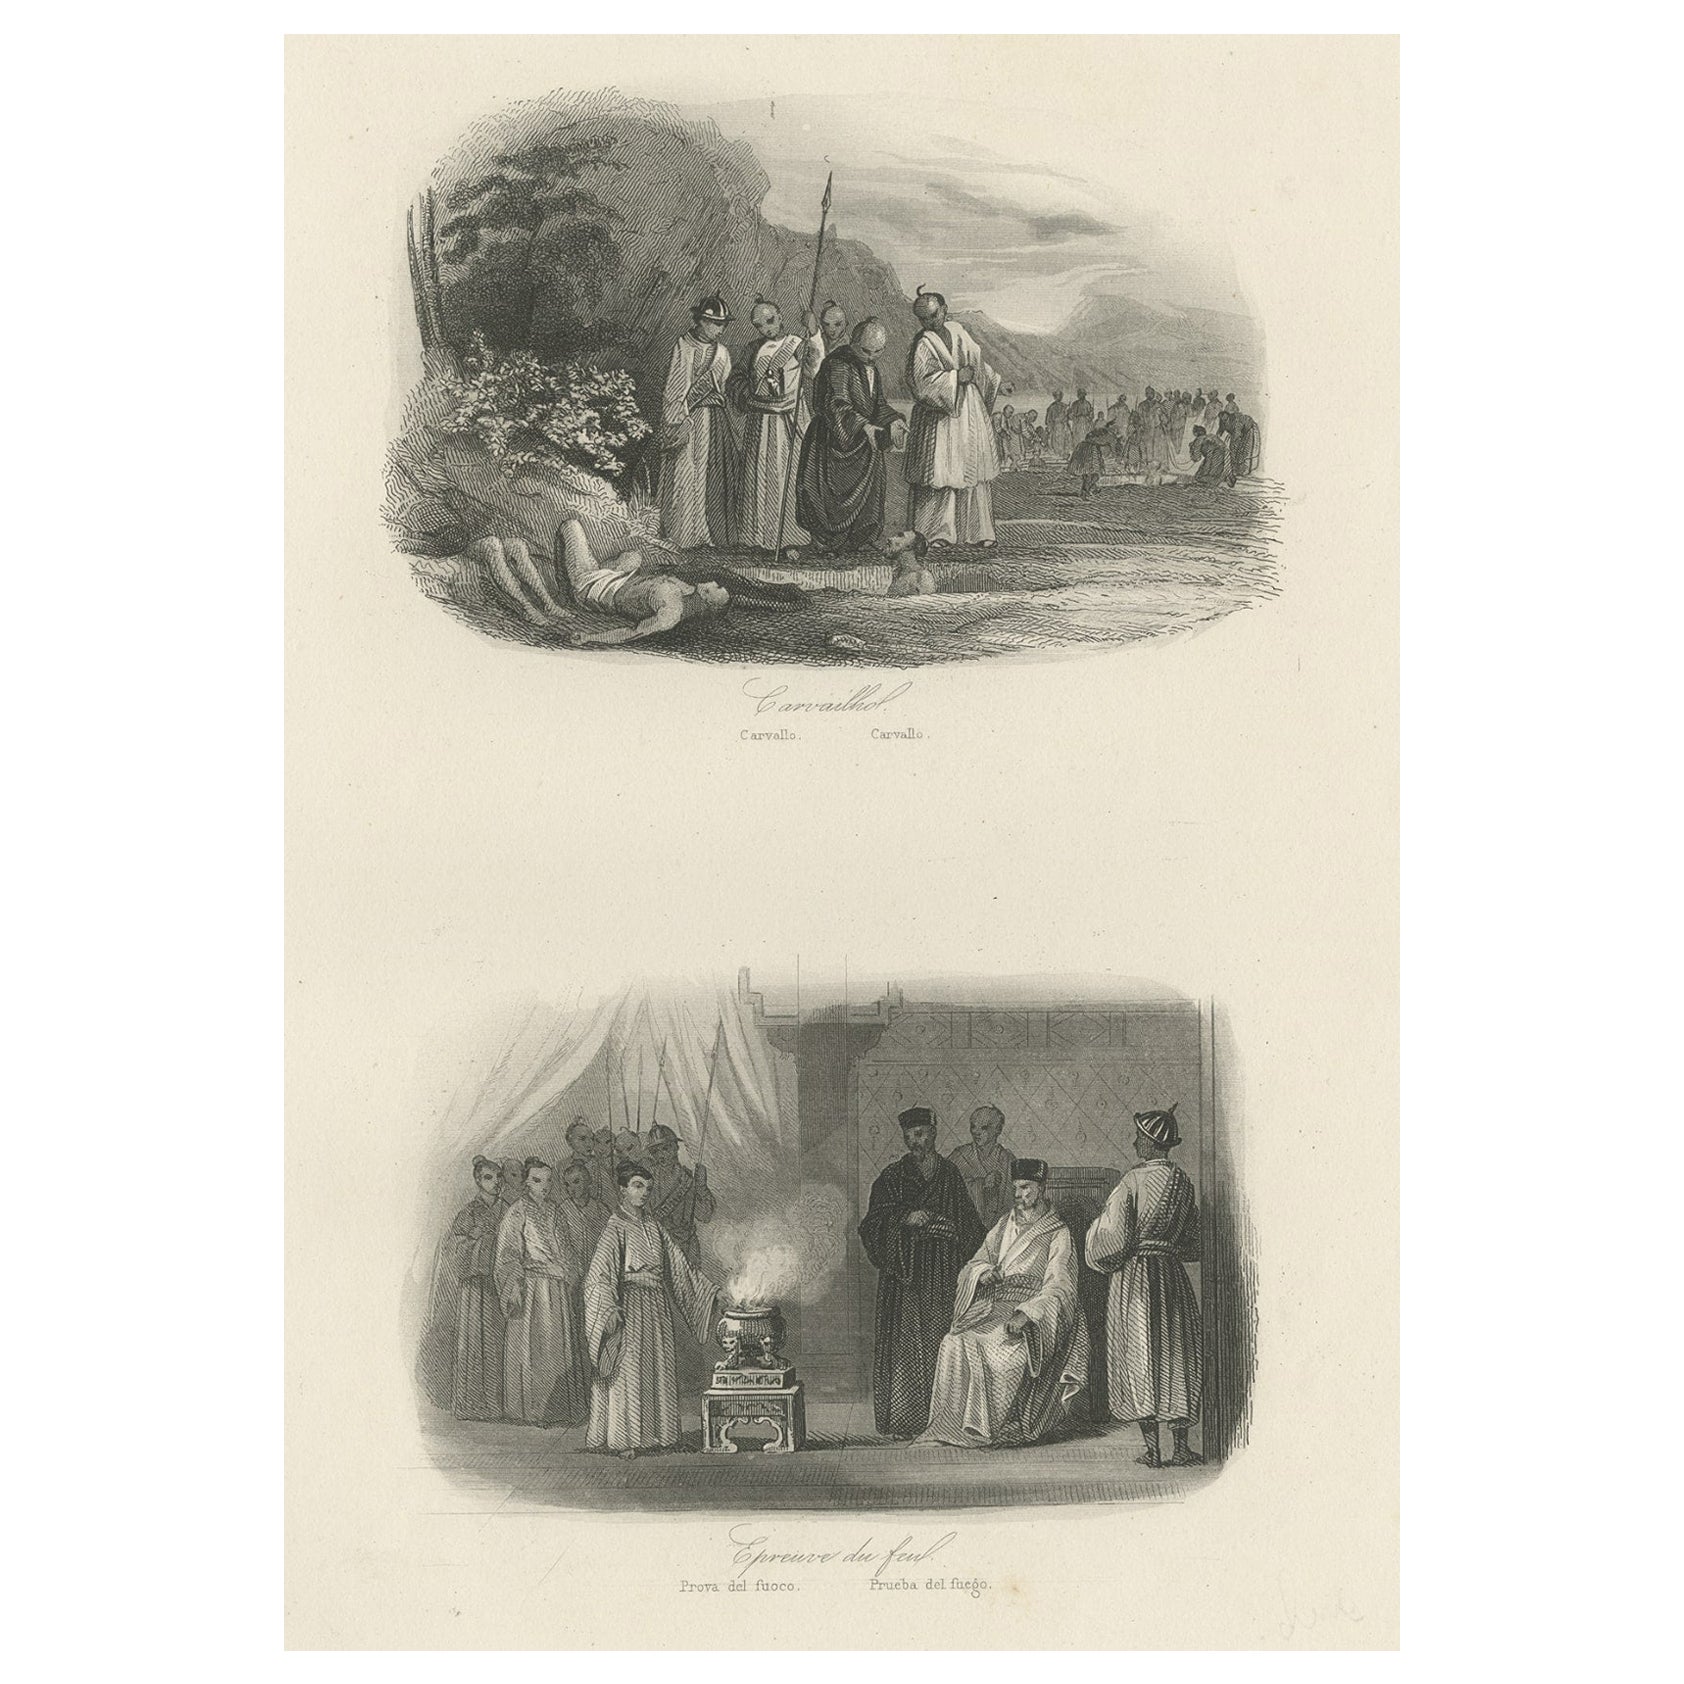 Antique Print of Religious Persecution by the Japanese, 1847